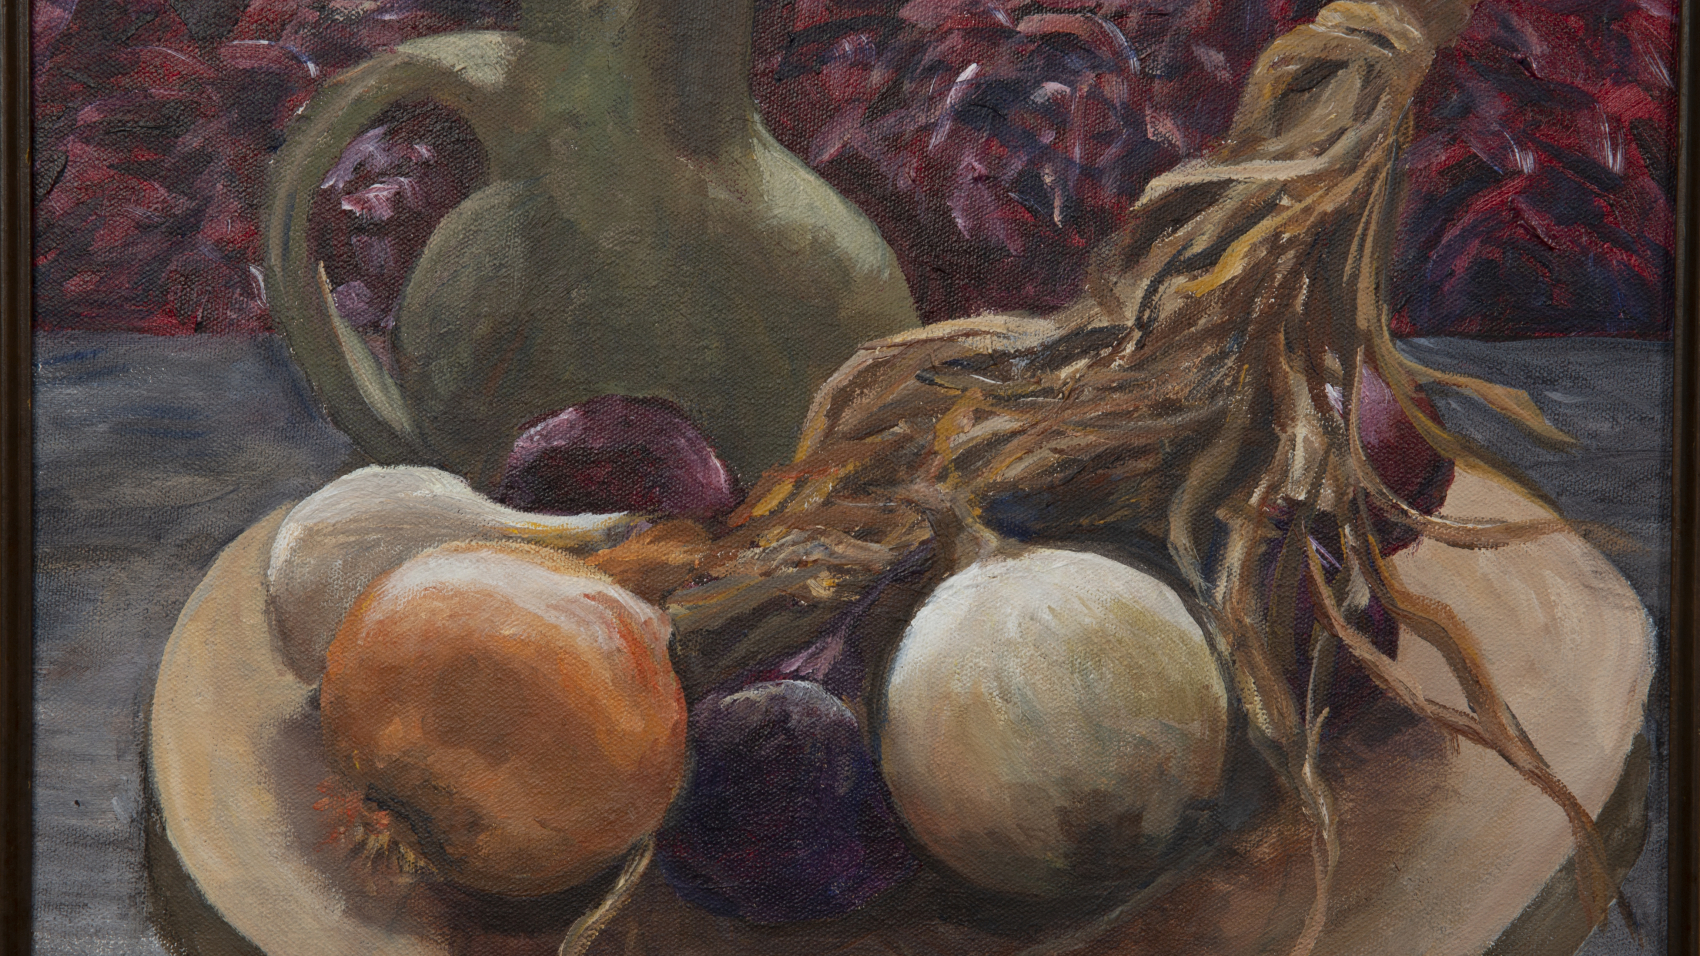 Painting - Onions II - painting of white, yellow and purple onions with stems lying on a terra cotta colored tray that is next to a green pitcher